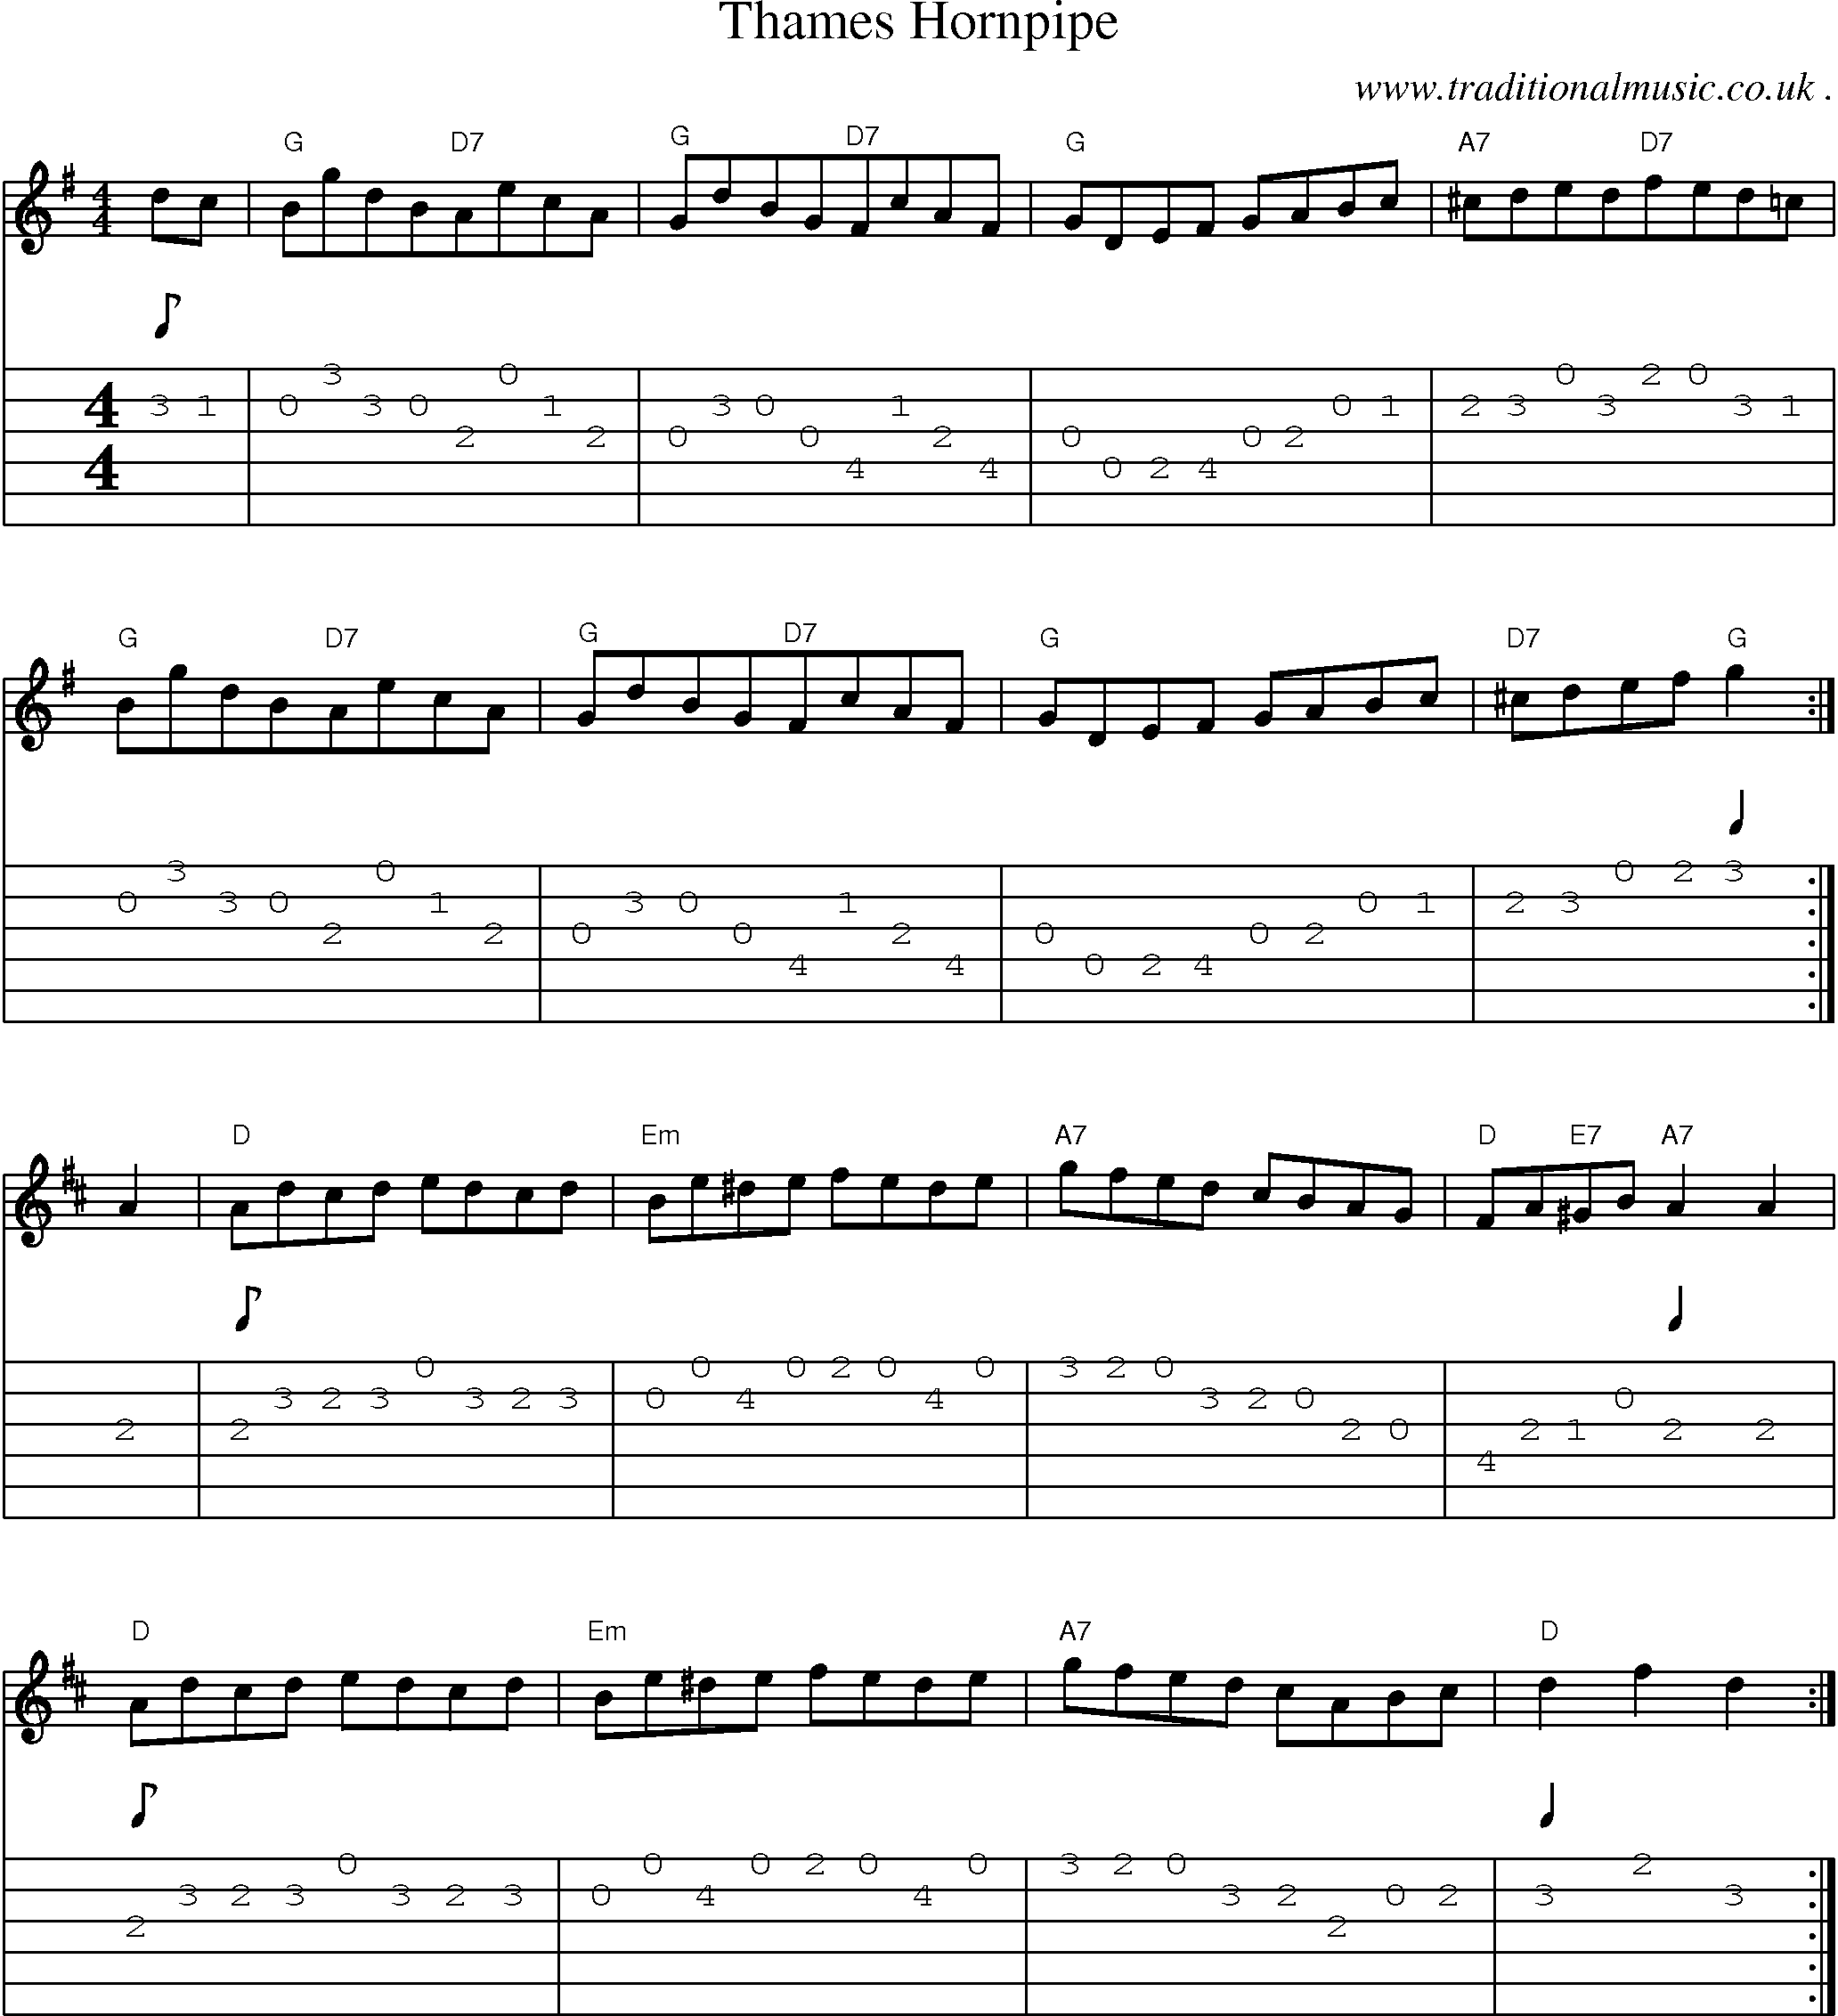 Sheet-Music and Guitar Tabs for Thames Hornpipe